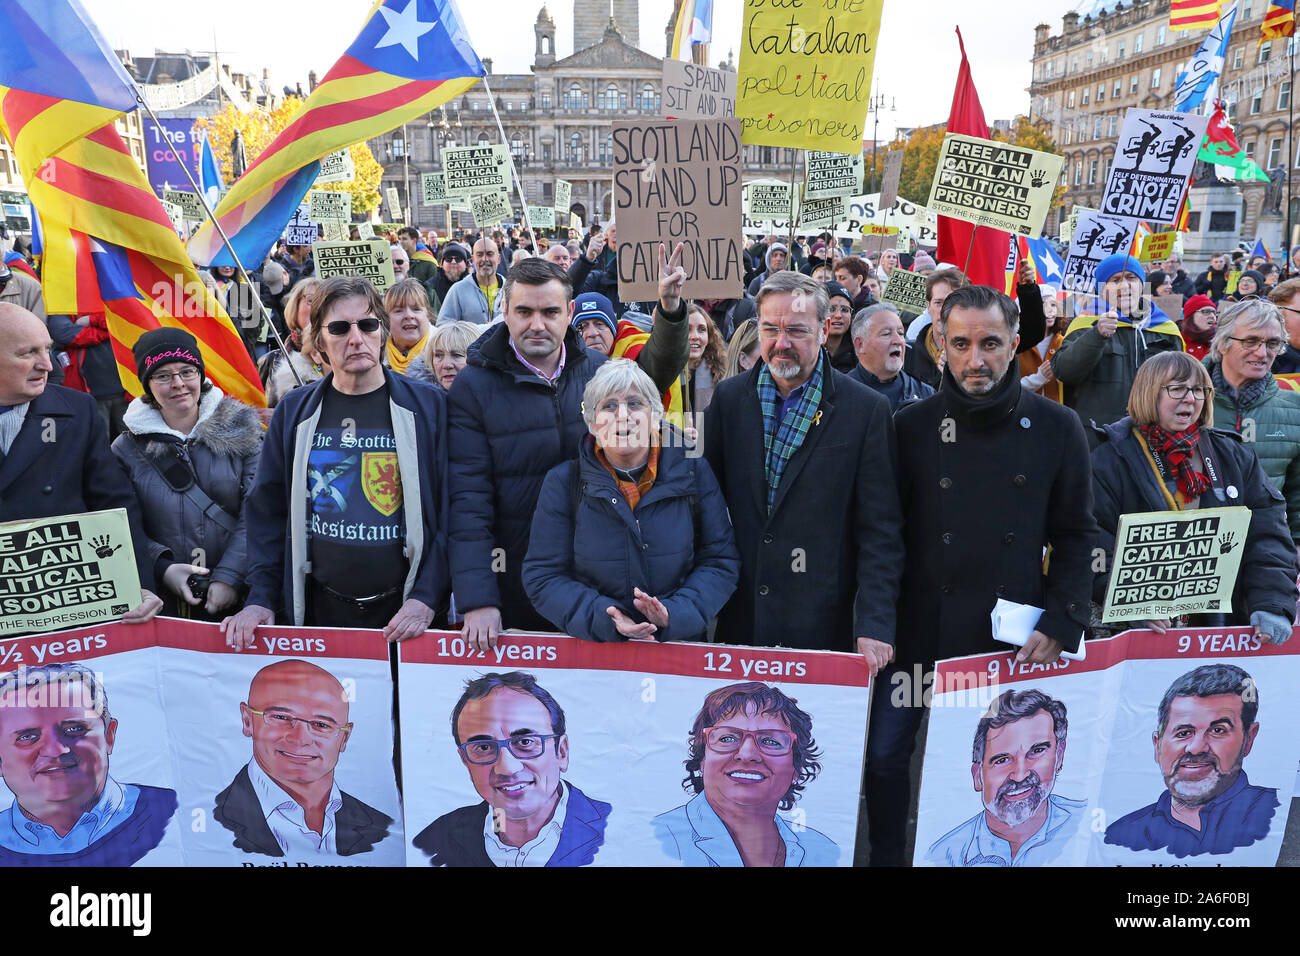 Former Catalan education minister Clara Ponsati (centre) joins protestors in support of Catalan political prisoners as they demonstrate in Glasgow, Scotland, after leading supporters of the independence were jailed in Spain. Stock Photo